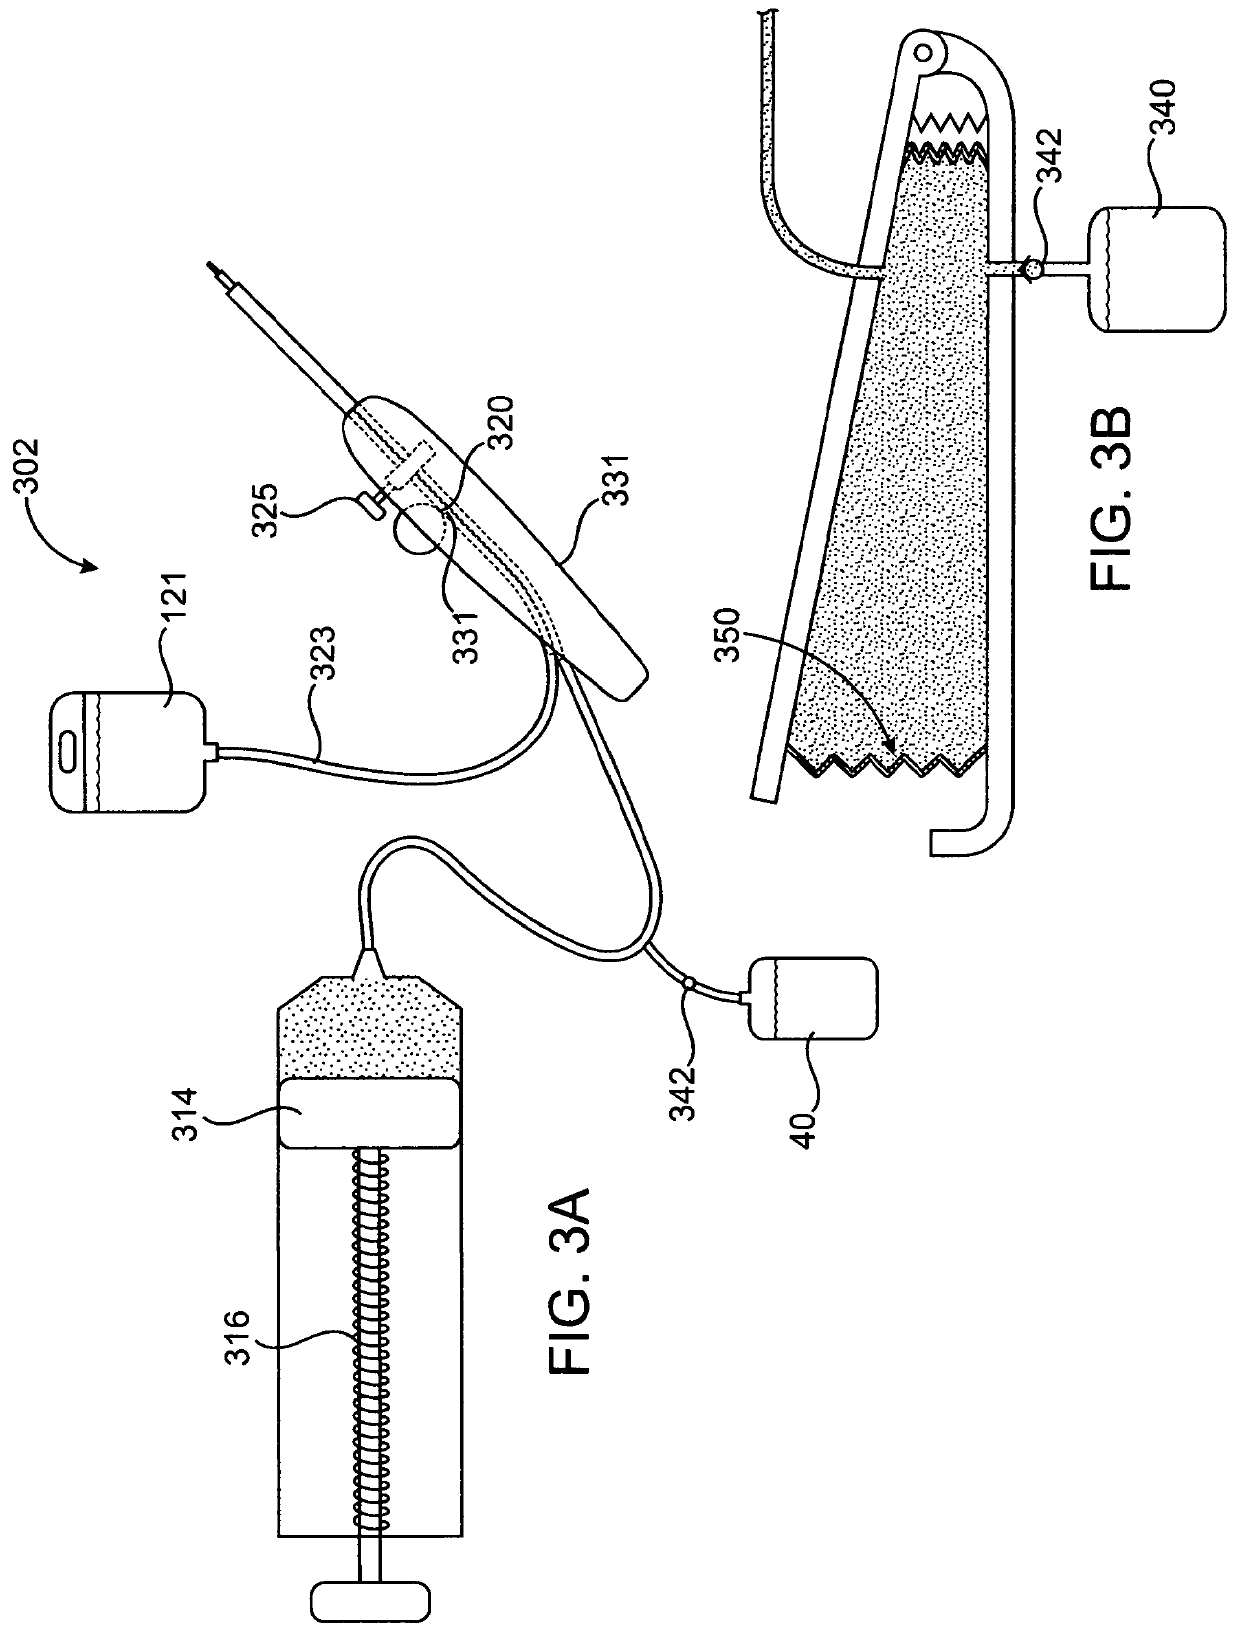 Devices and methods for ocular surgery